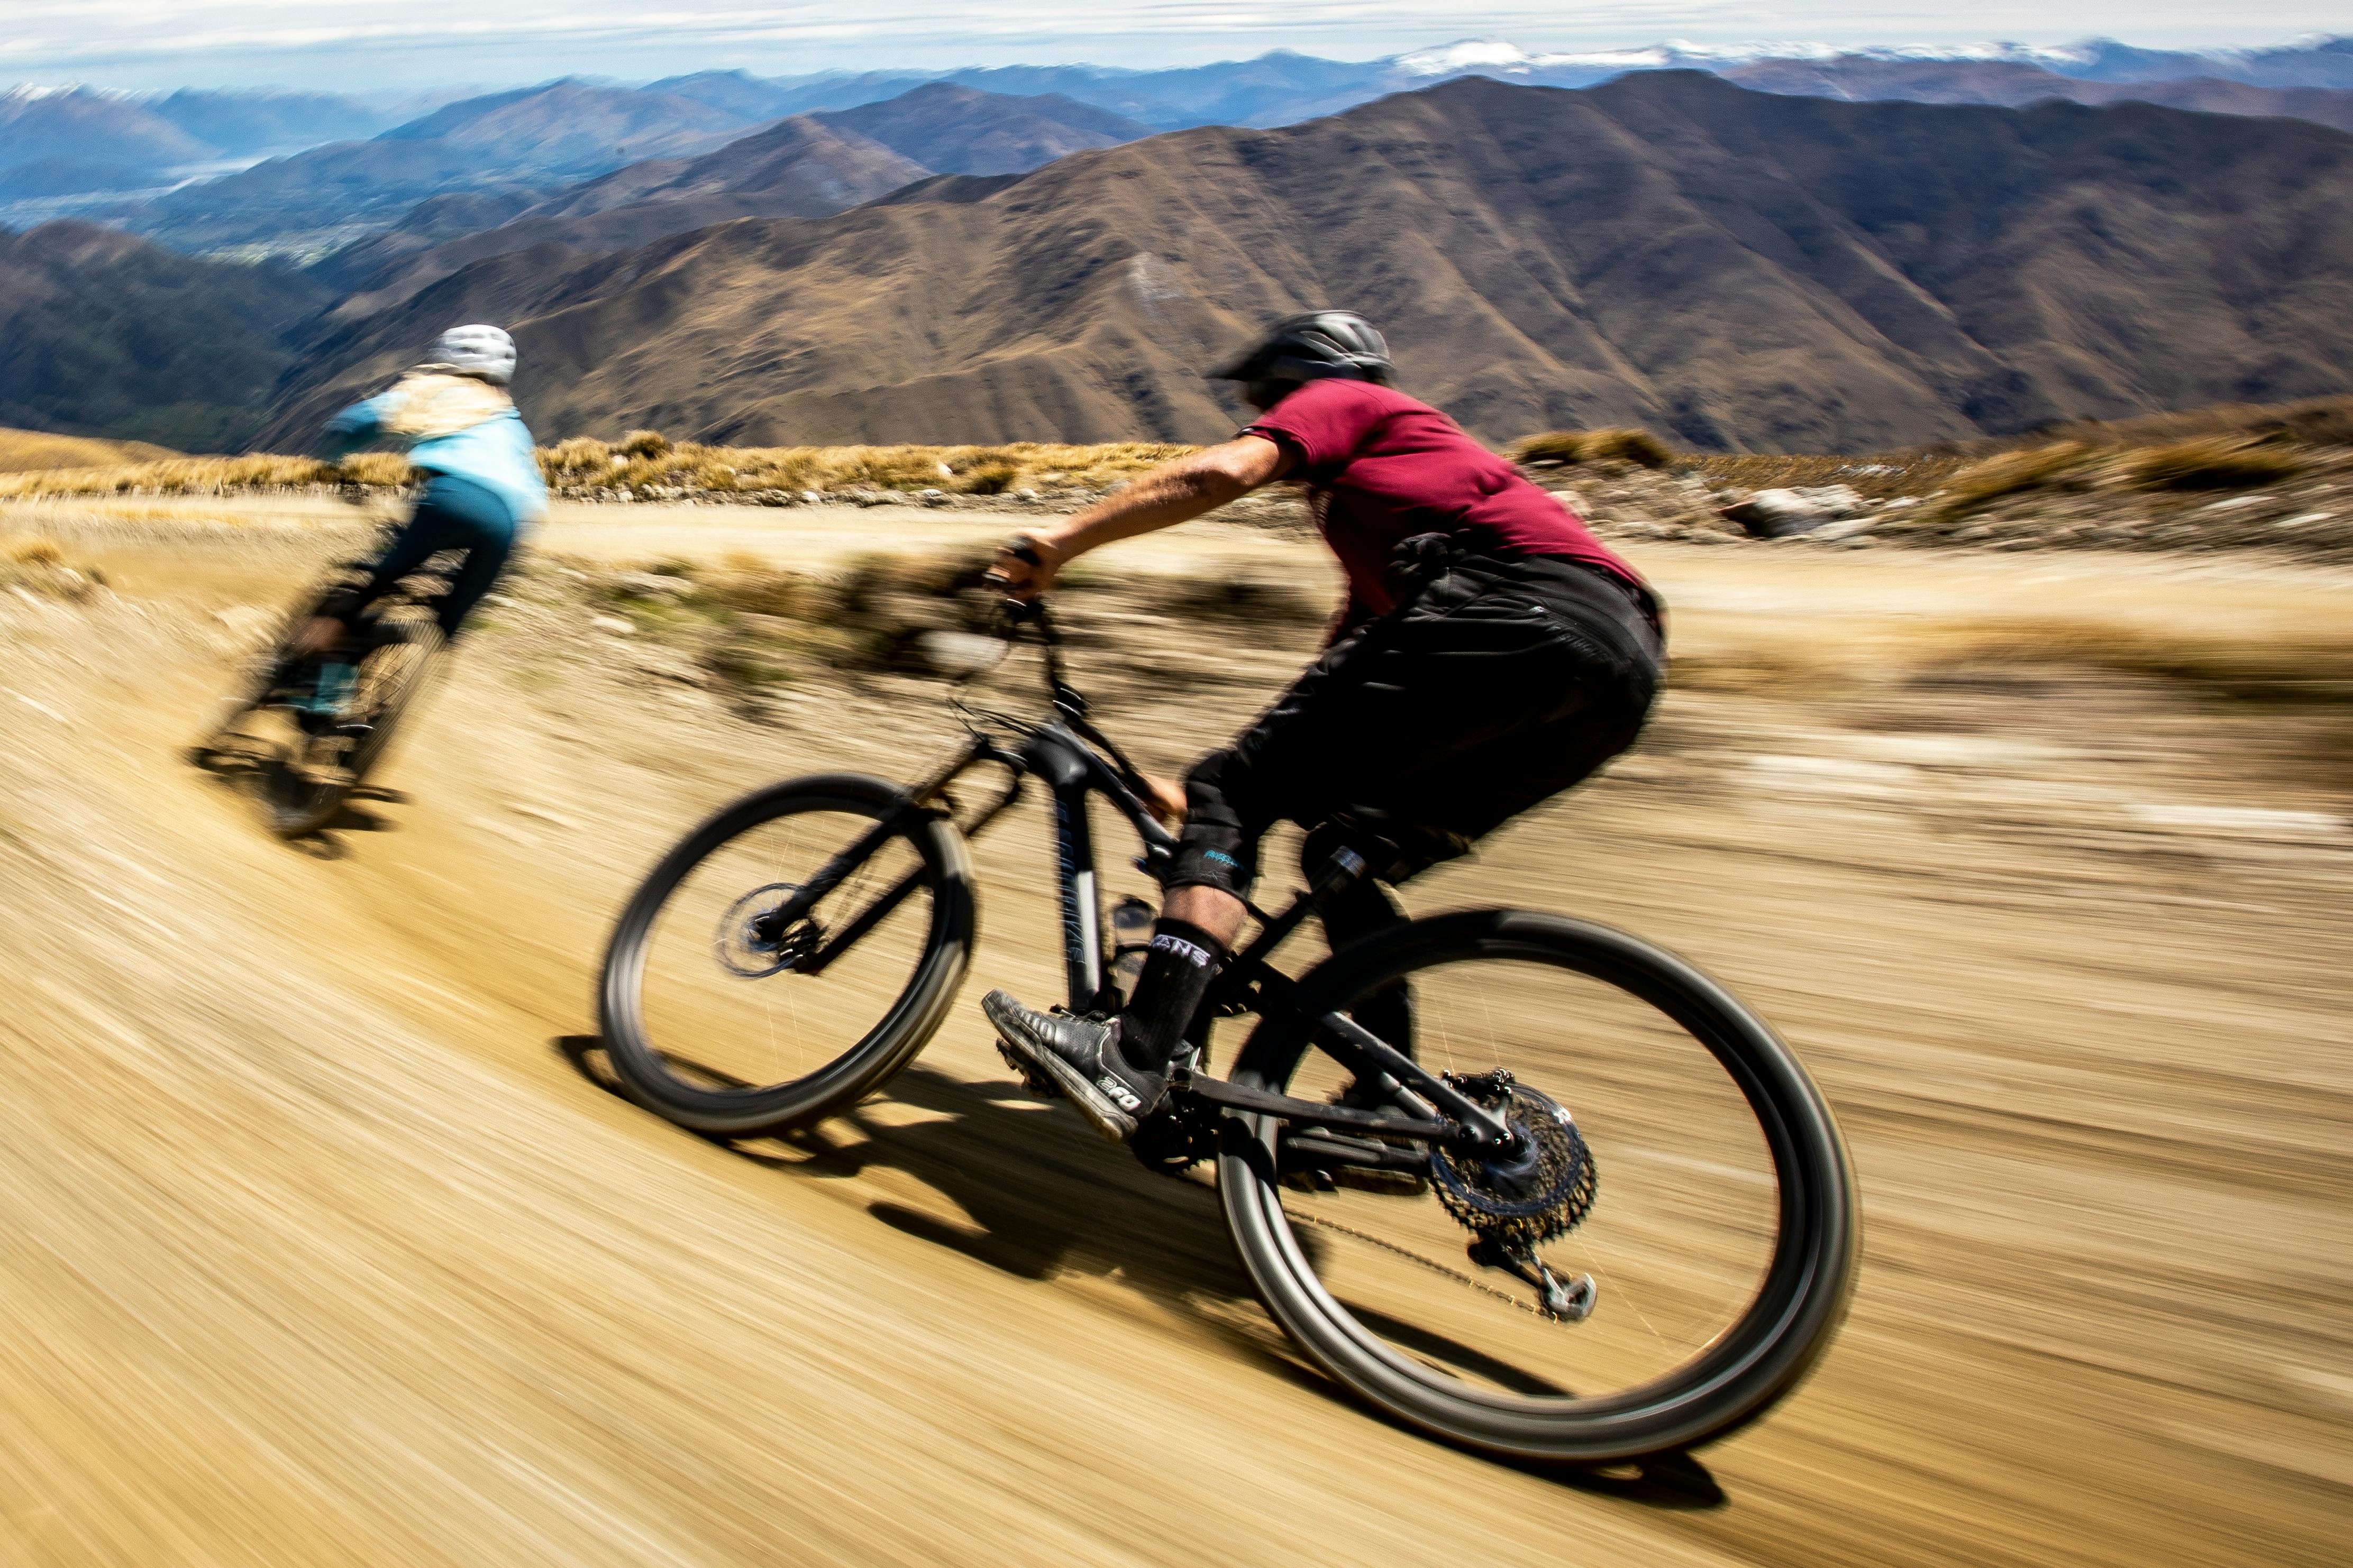 A man and woman speeding down a trail on their mountain bikes, mountain scenery in the background.